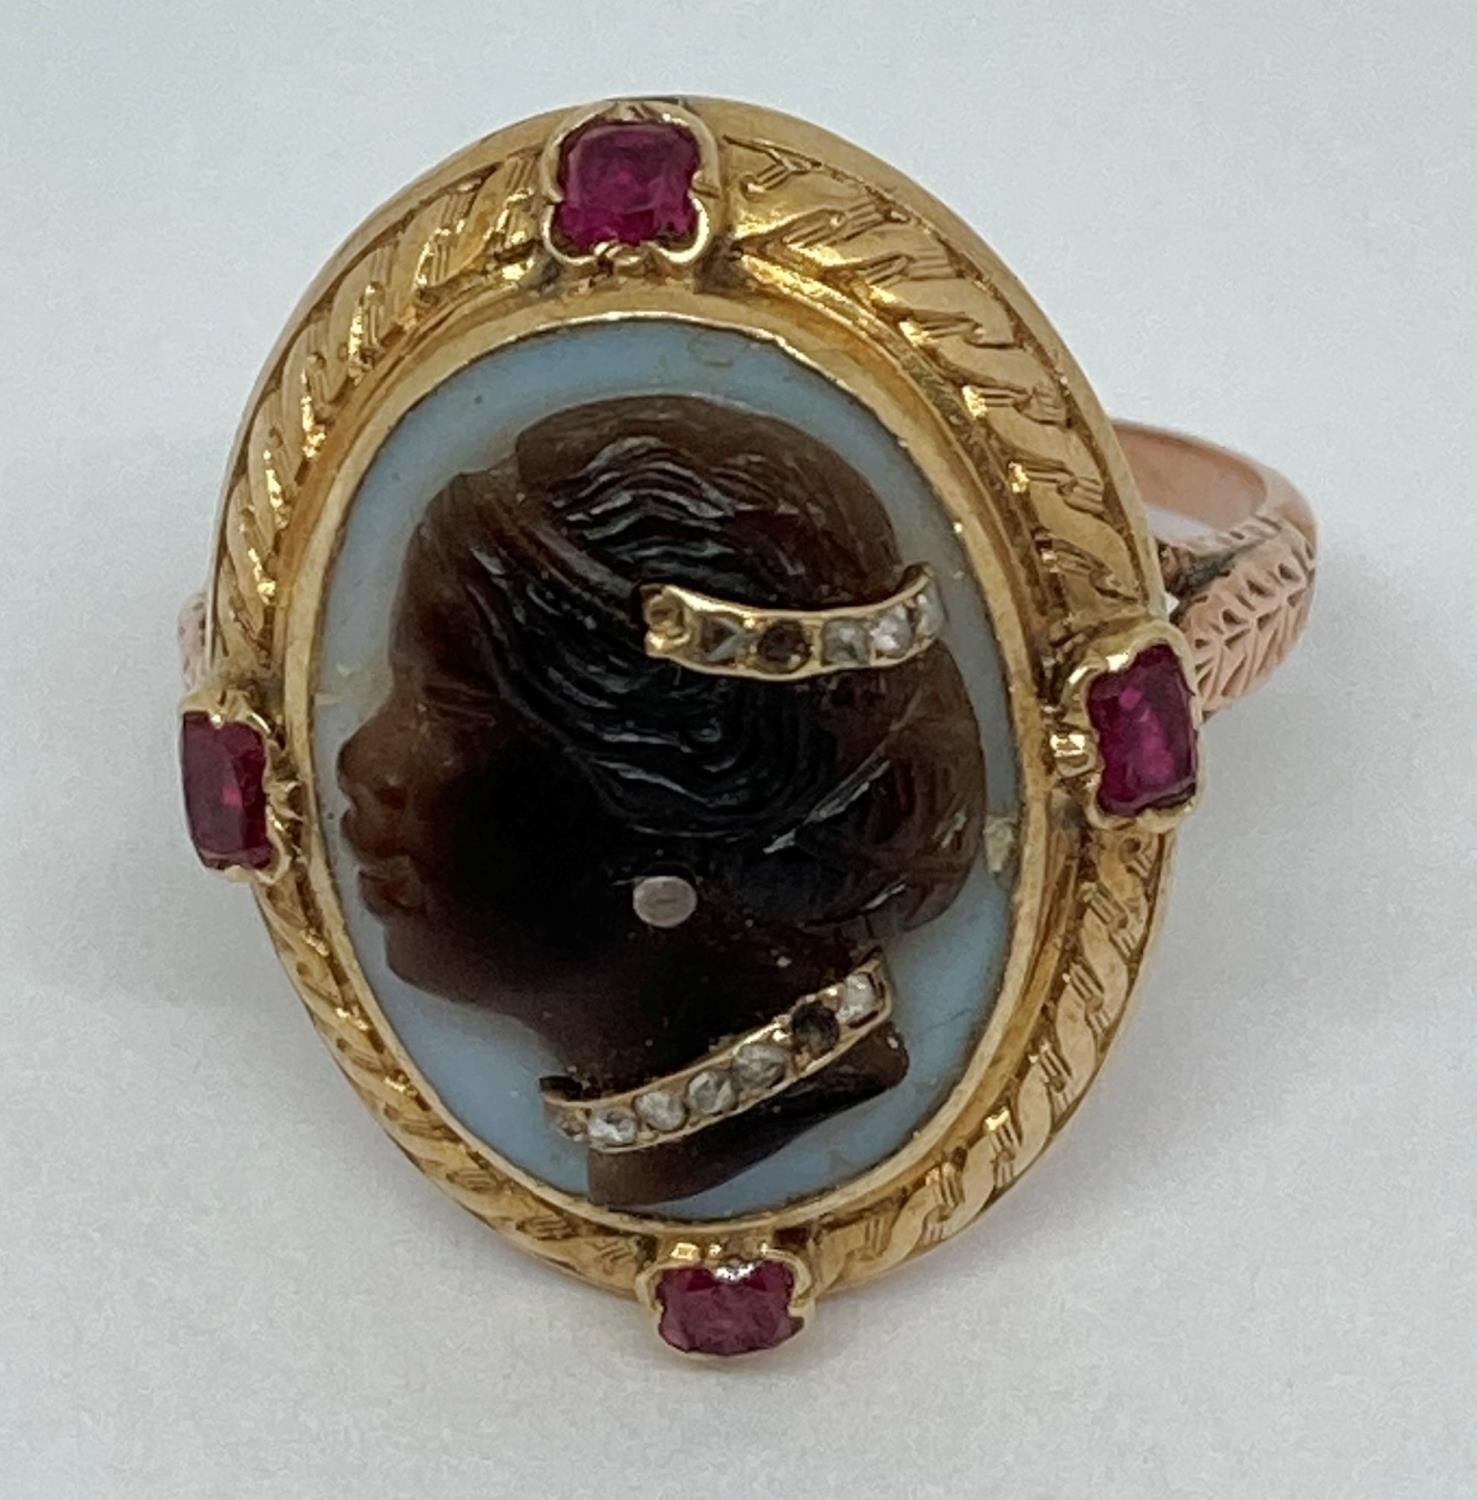 Fine antique blackamoor cameo ring depicting a lady, the agate cameo set with rose cut diamonds - Image 3 of 9